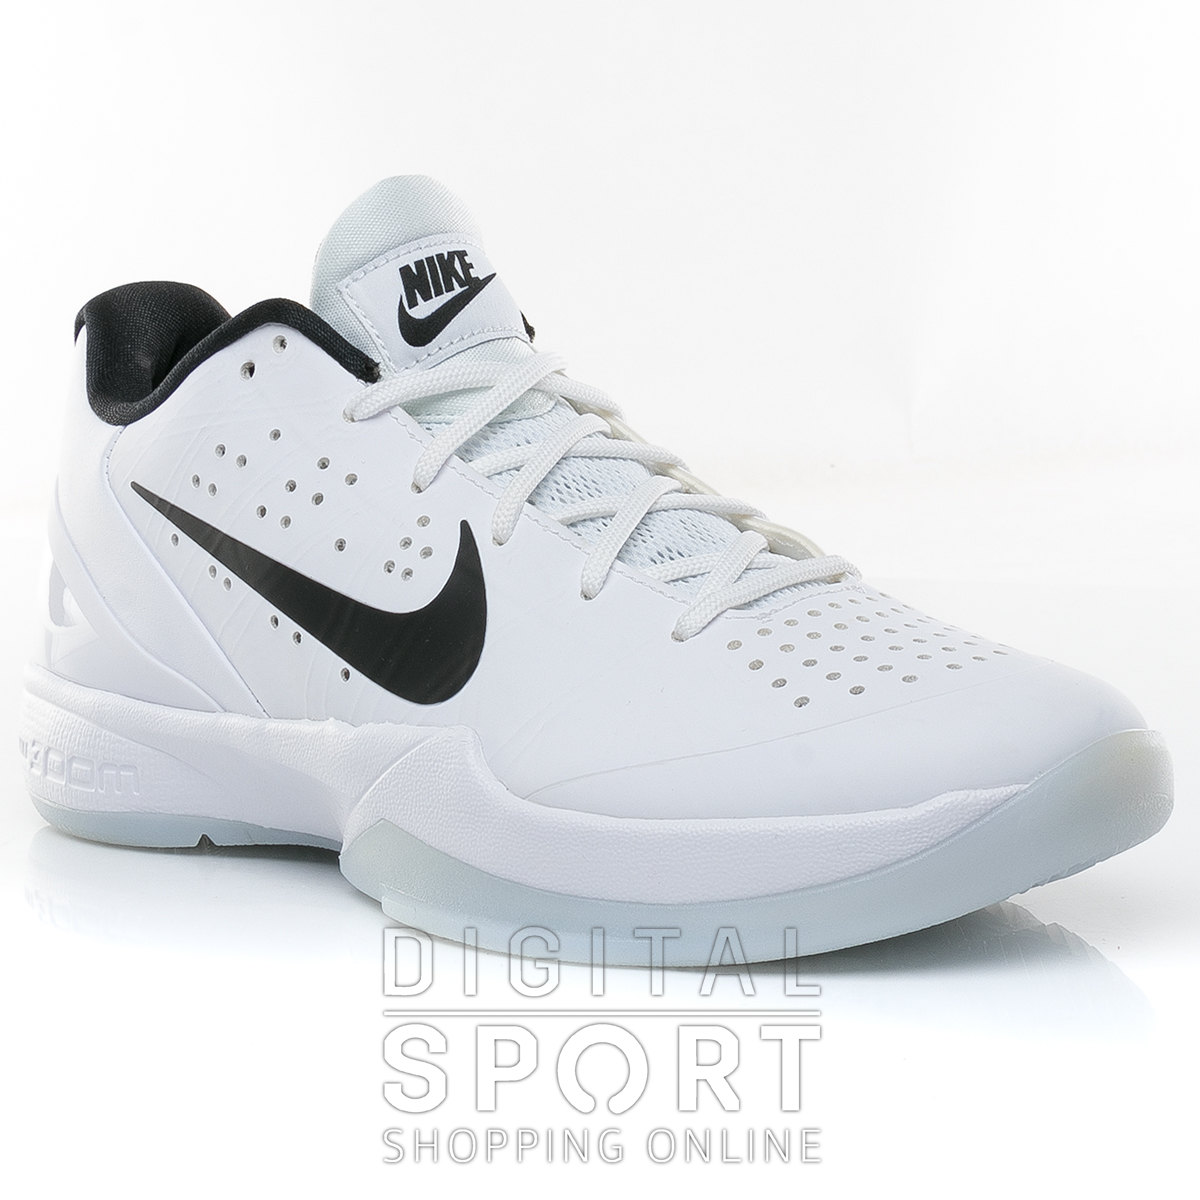 nike voley argentina,cheap - OFF 61% -treocungmay.vn